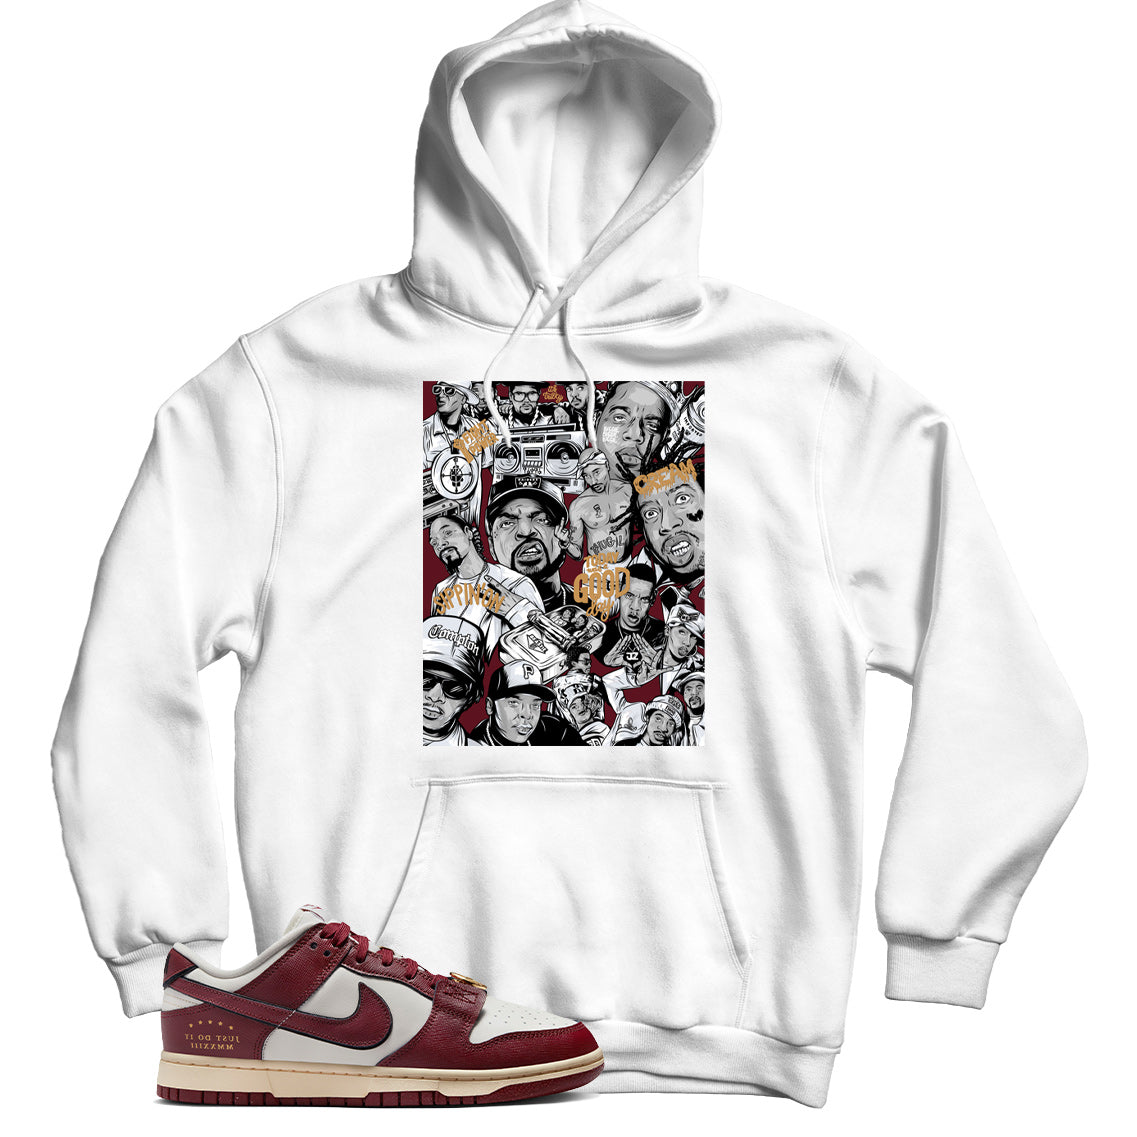 Dunk Low Just Do It Sail Team Red hoodie